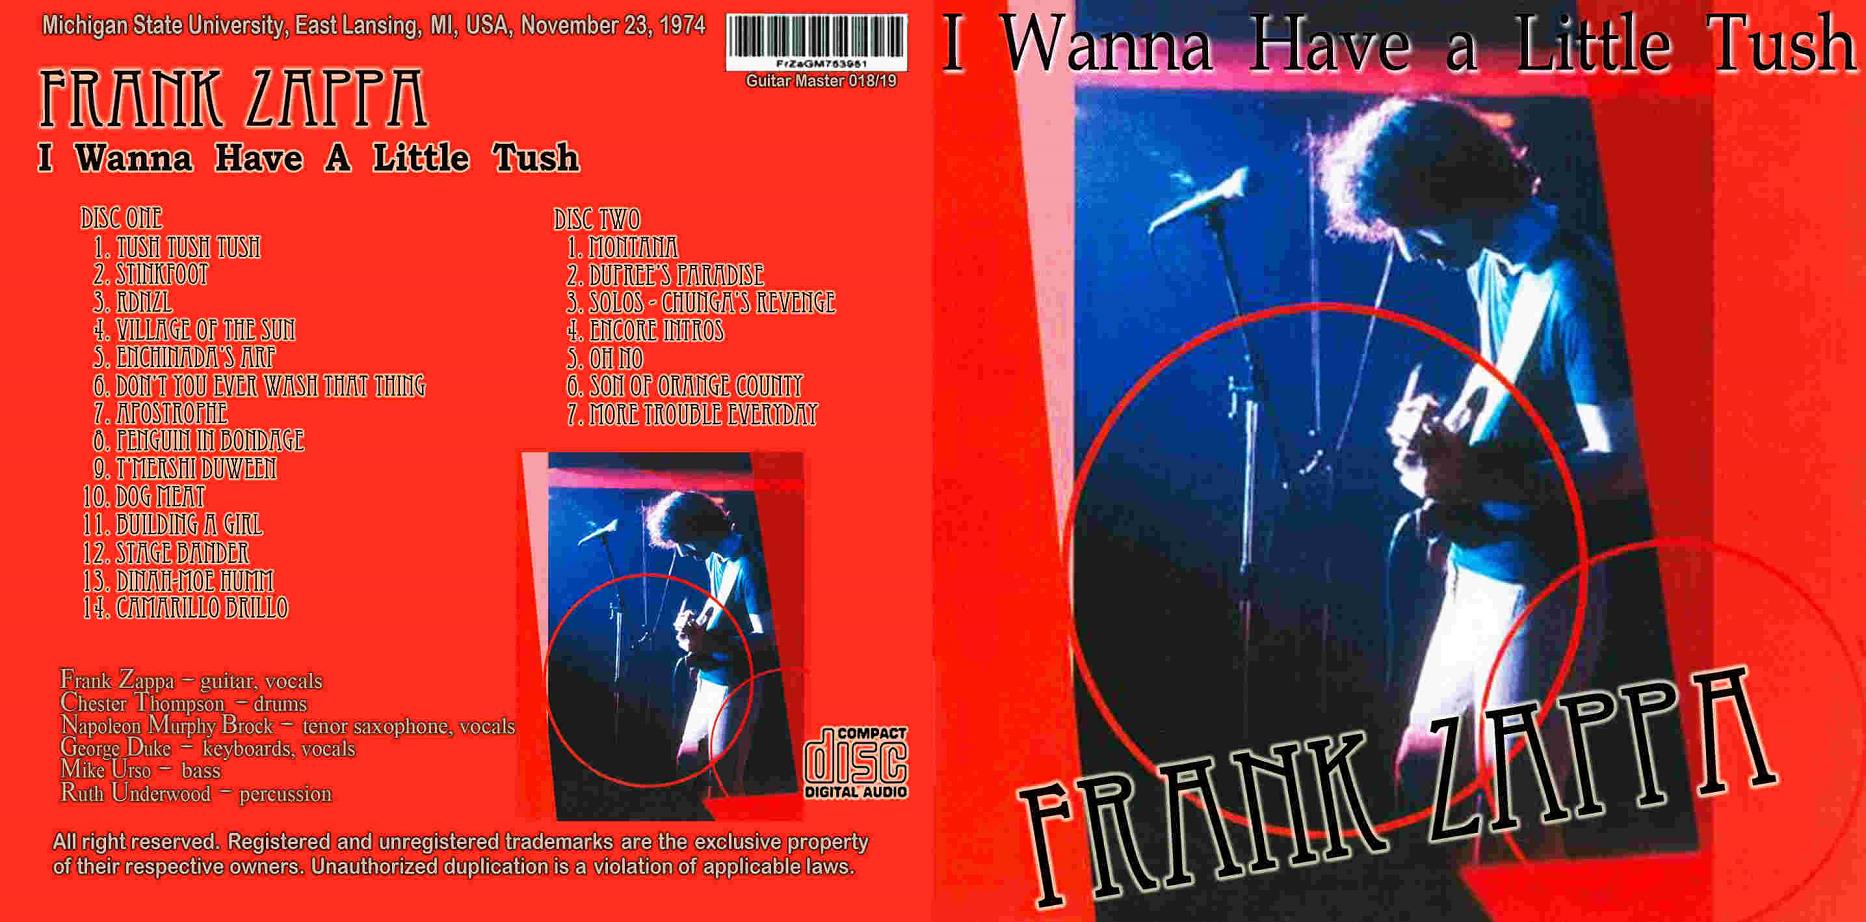 1974-11-23-I WANNA-HAVE-A-LITTLE-TUSH-[front]